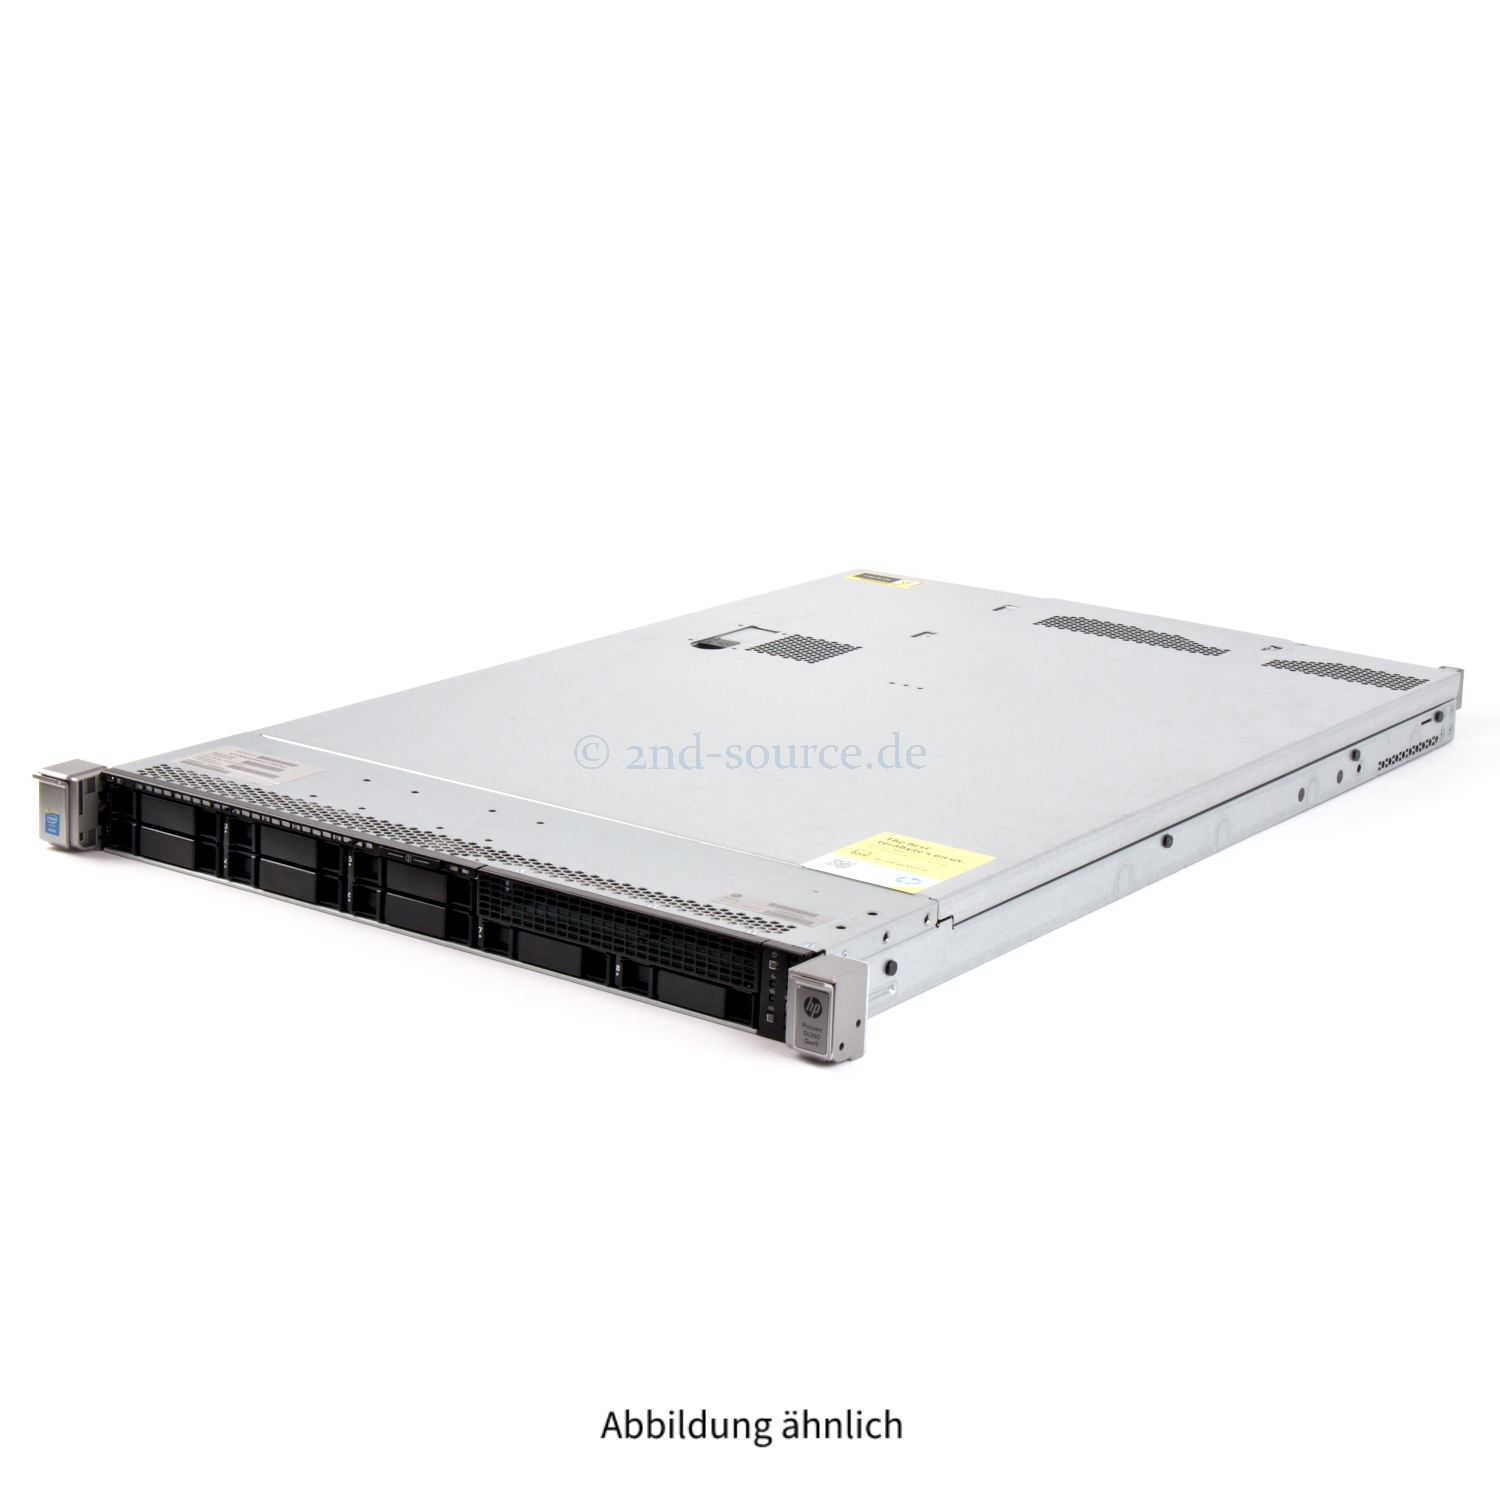 HPE DL360 G9 8xSFF B140i 331i CTO Chassis 755258-B21 775400-001